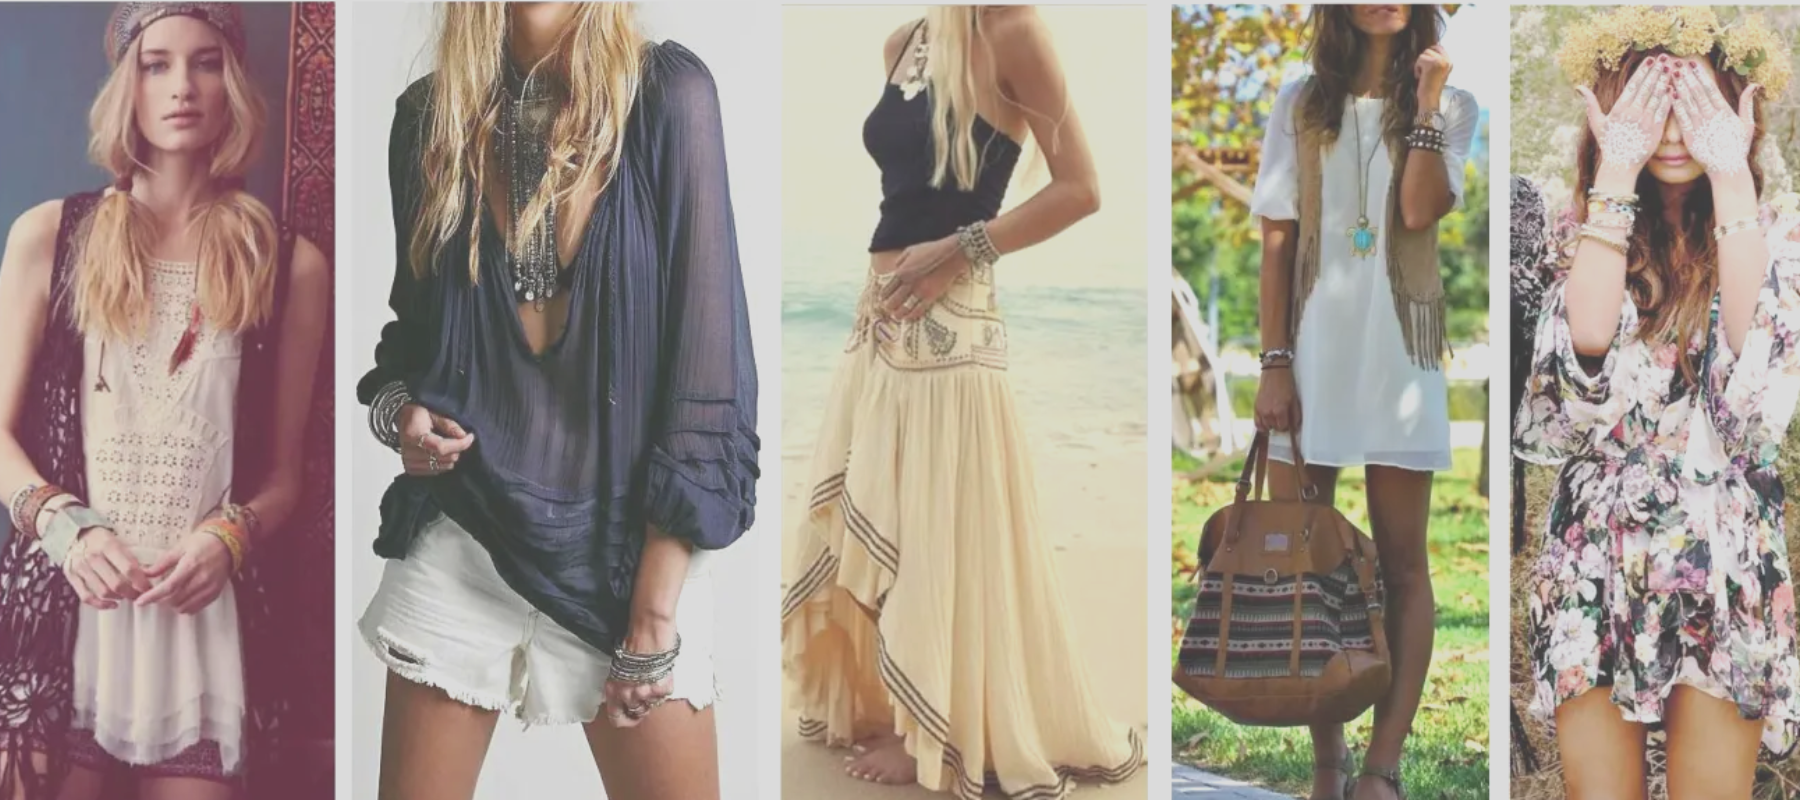 The Art of Layering: How to Achieve a Boho Look, bohemian, boho style,  culture and more